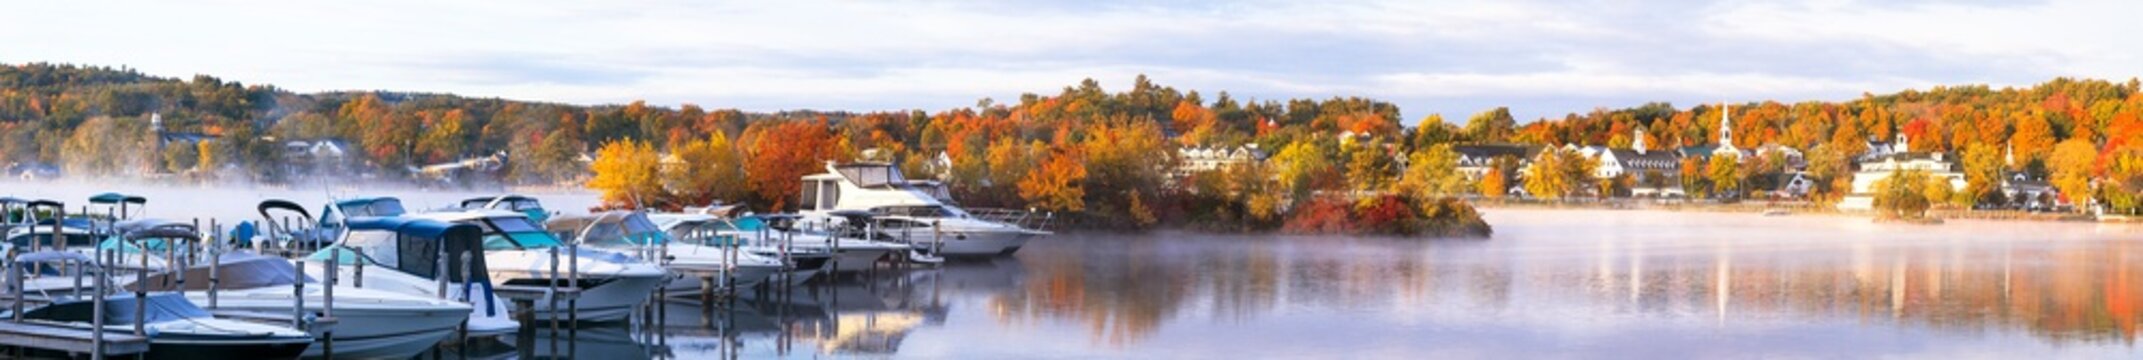 Foliage along the Lake. Meredith is a town in Belknap County, New Hampshire, United States. Meredith is situated beside Lake Winnipesaukee.